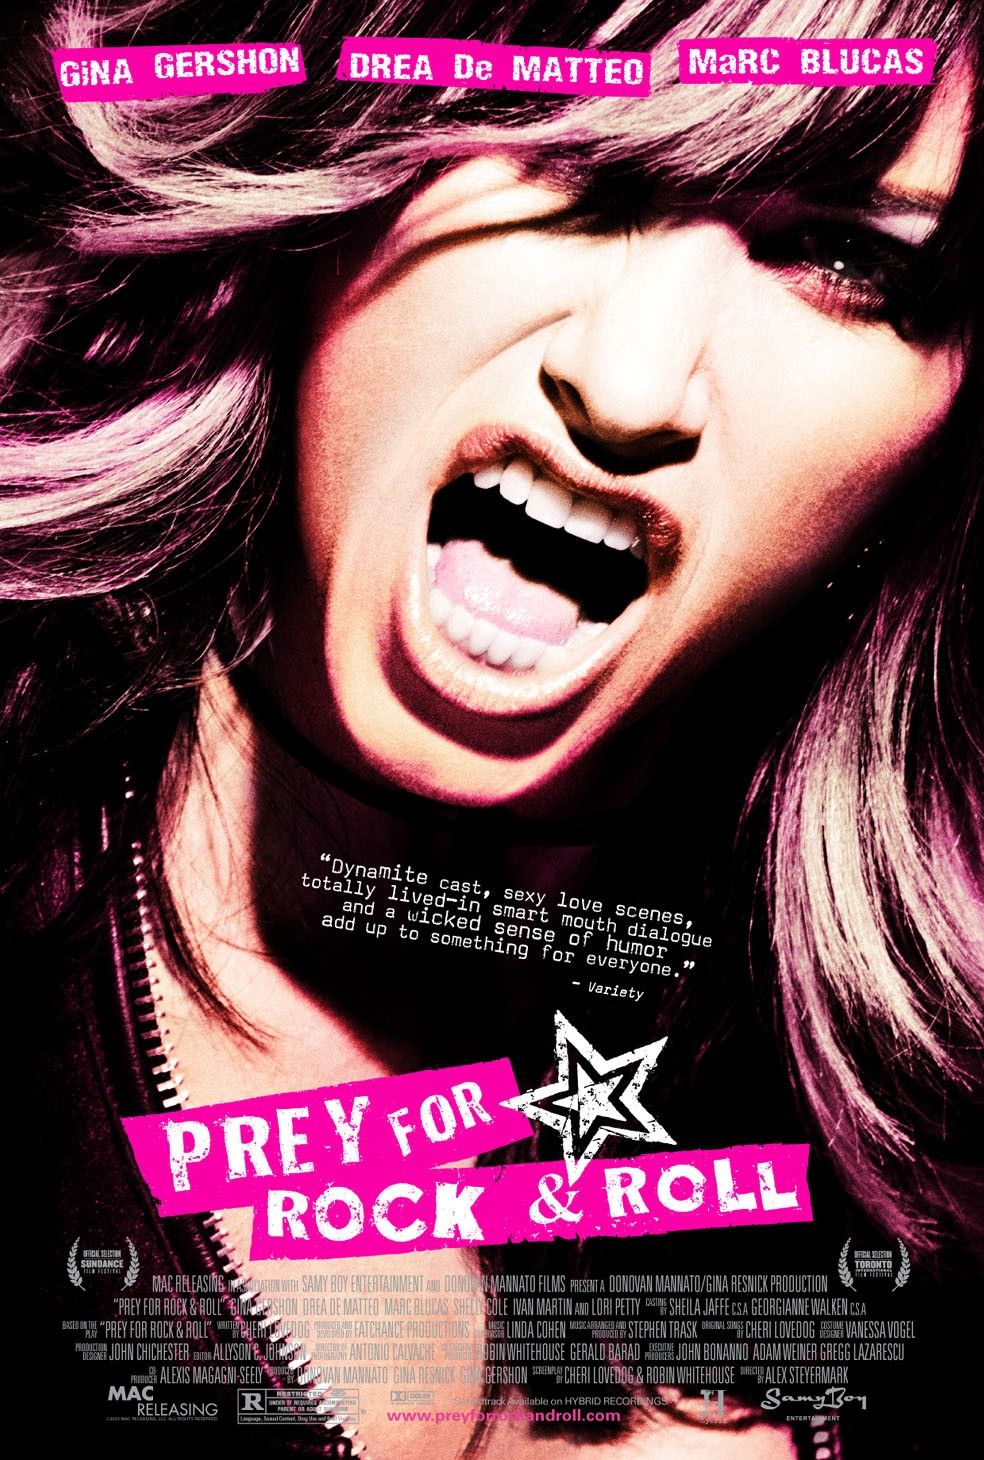 Extra Large Movie Poster Image for Prey for Rock & Roll 